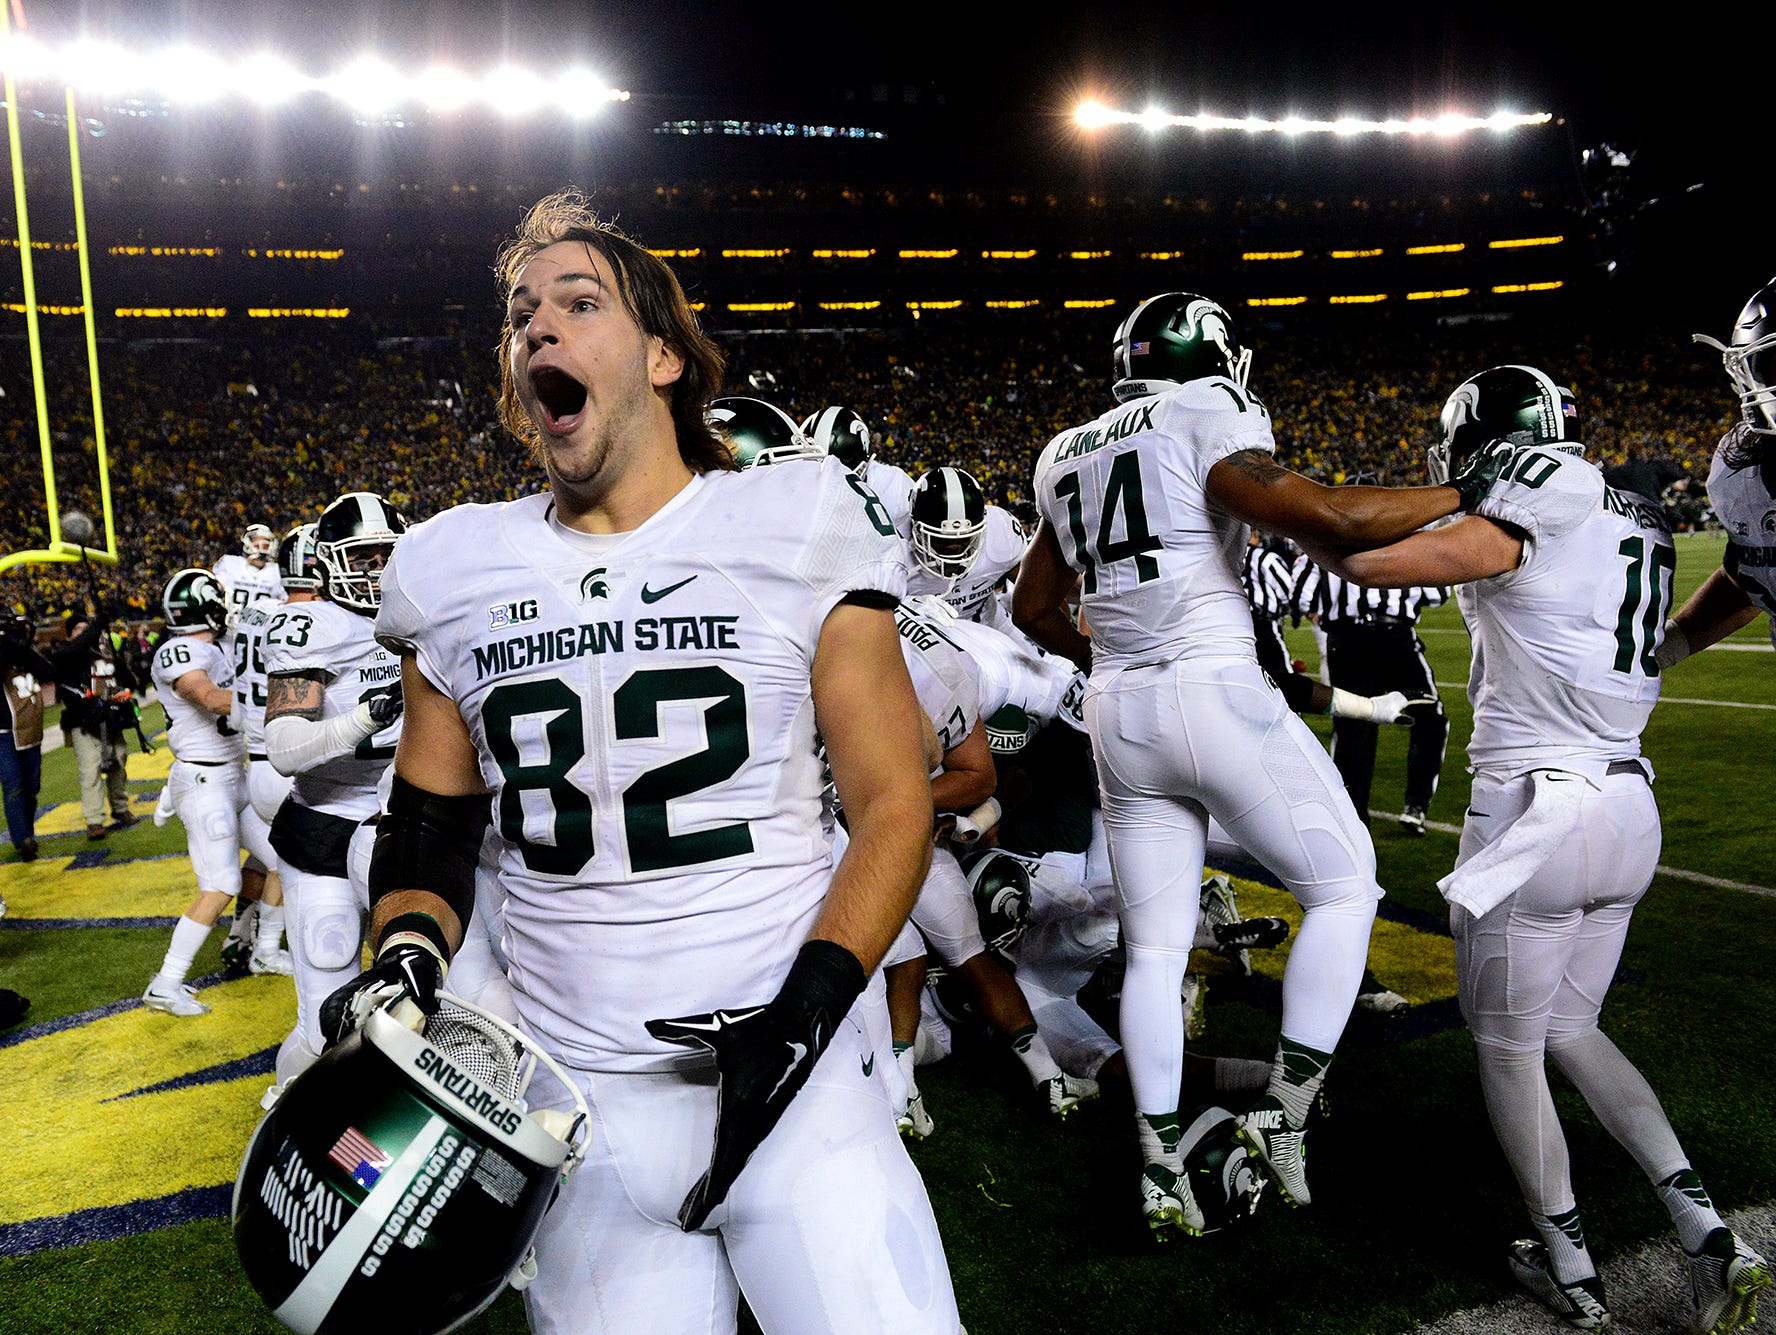 Michigan State tight end Josiah Price screams as he celebrates with teammates after a thrilling, last-second 27-23 victory over Michigan Saturday in Ann Arbor.